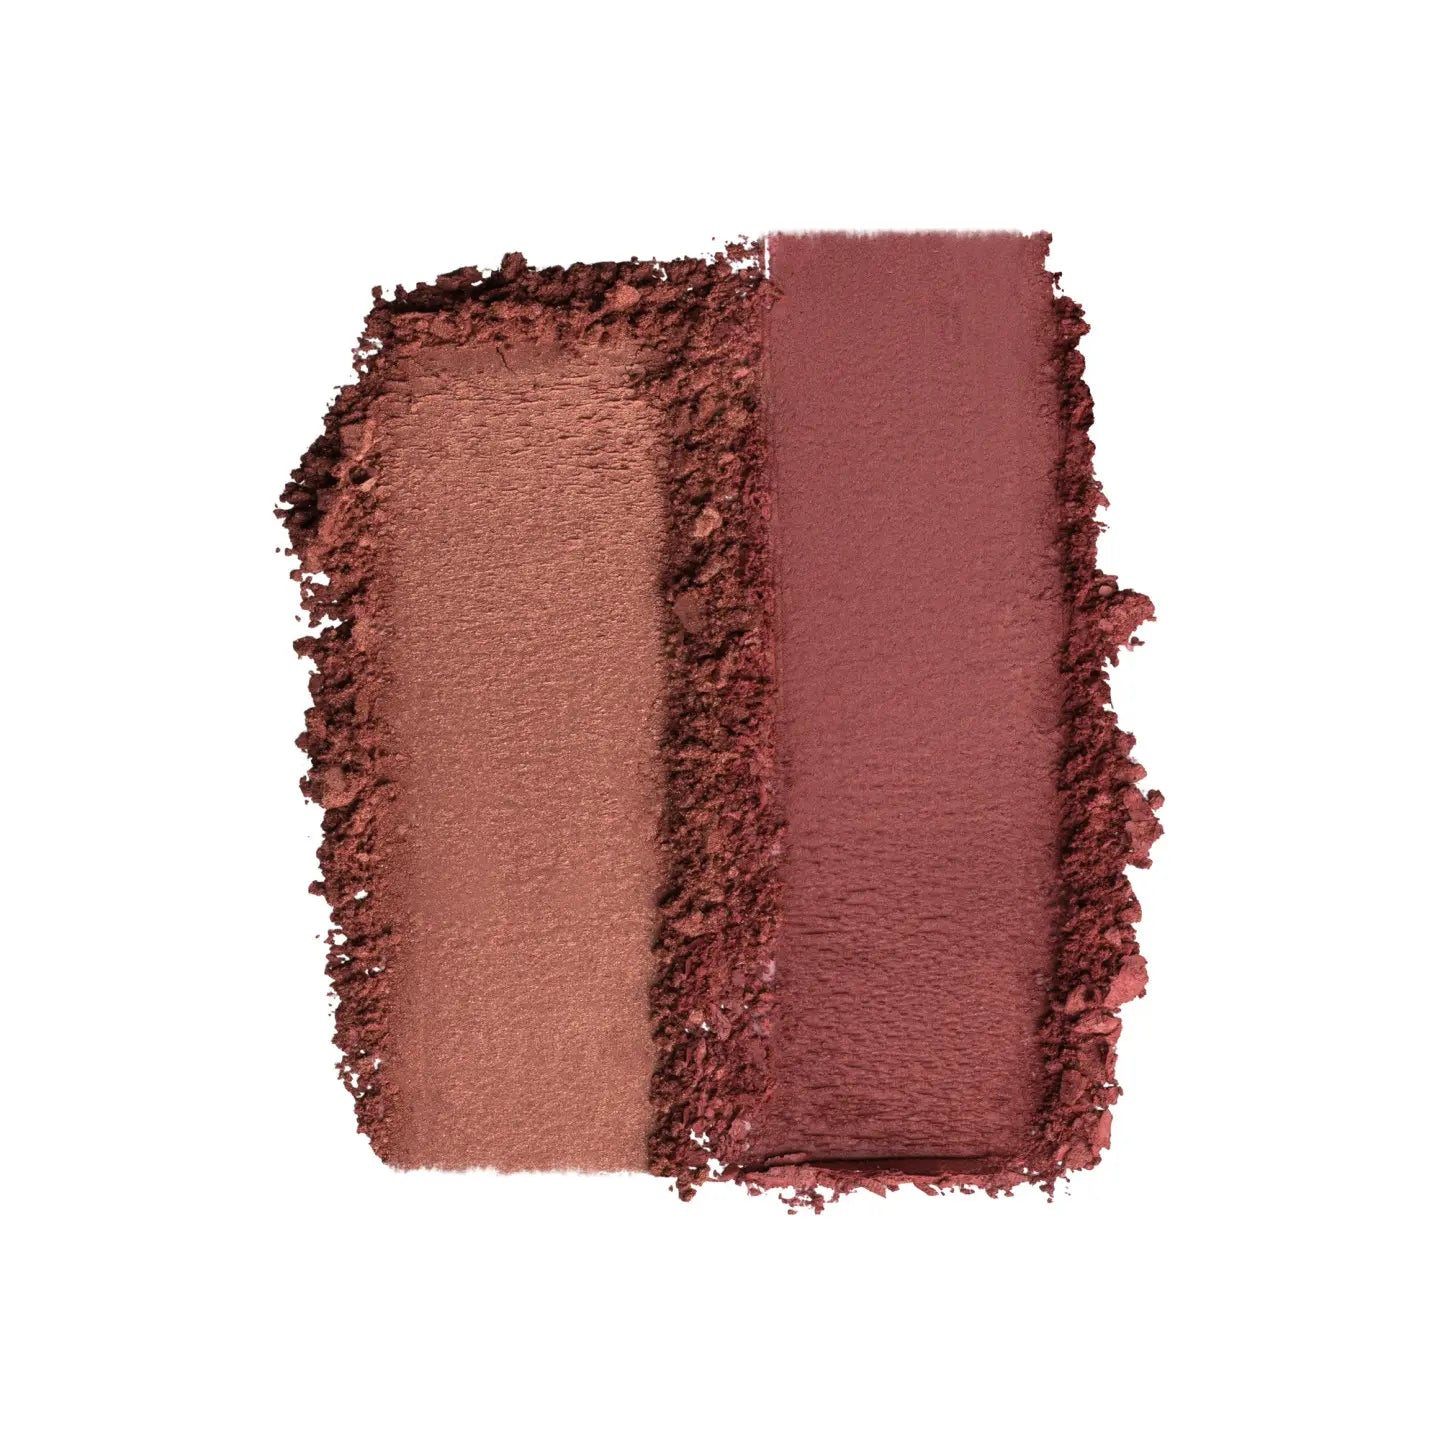 GXVE CRUSH ON YOU - Clean Amplifying Blush Duo